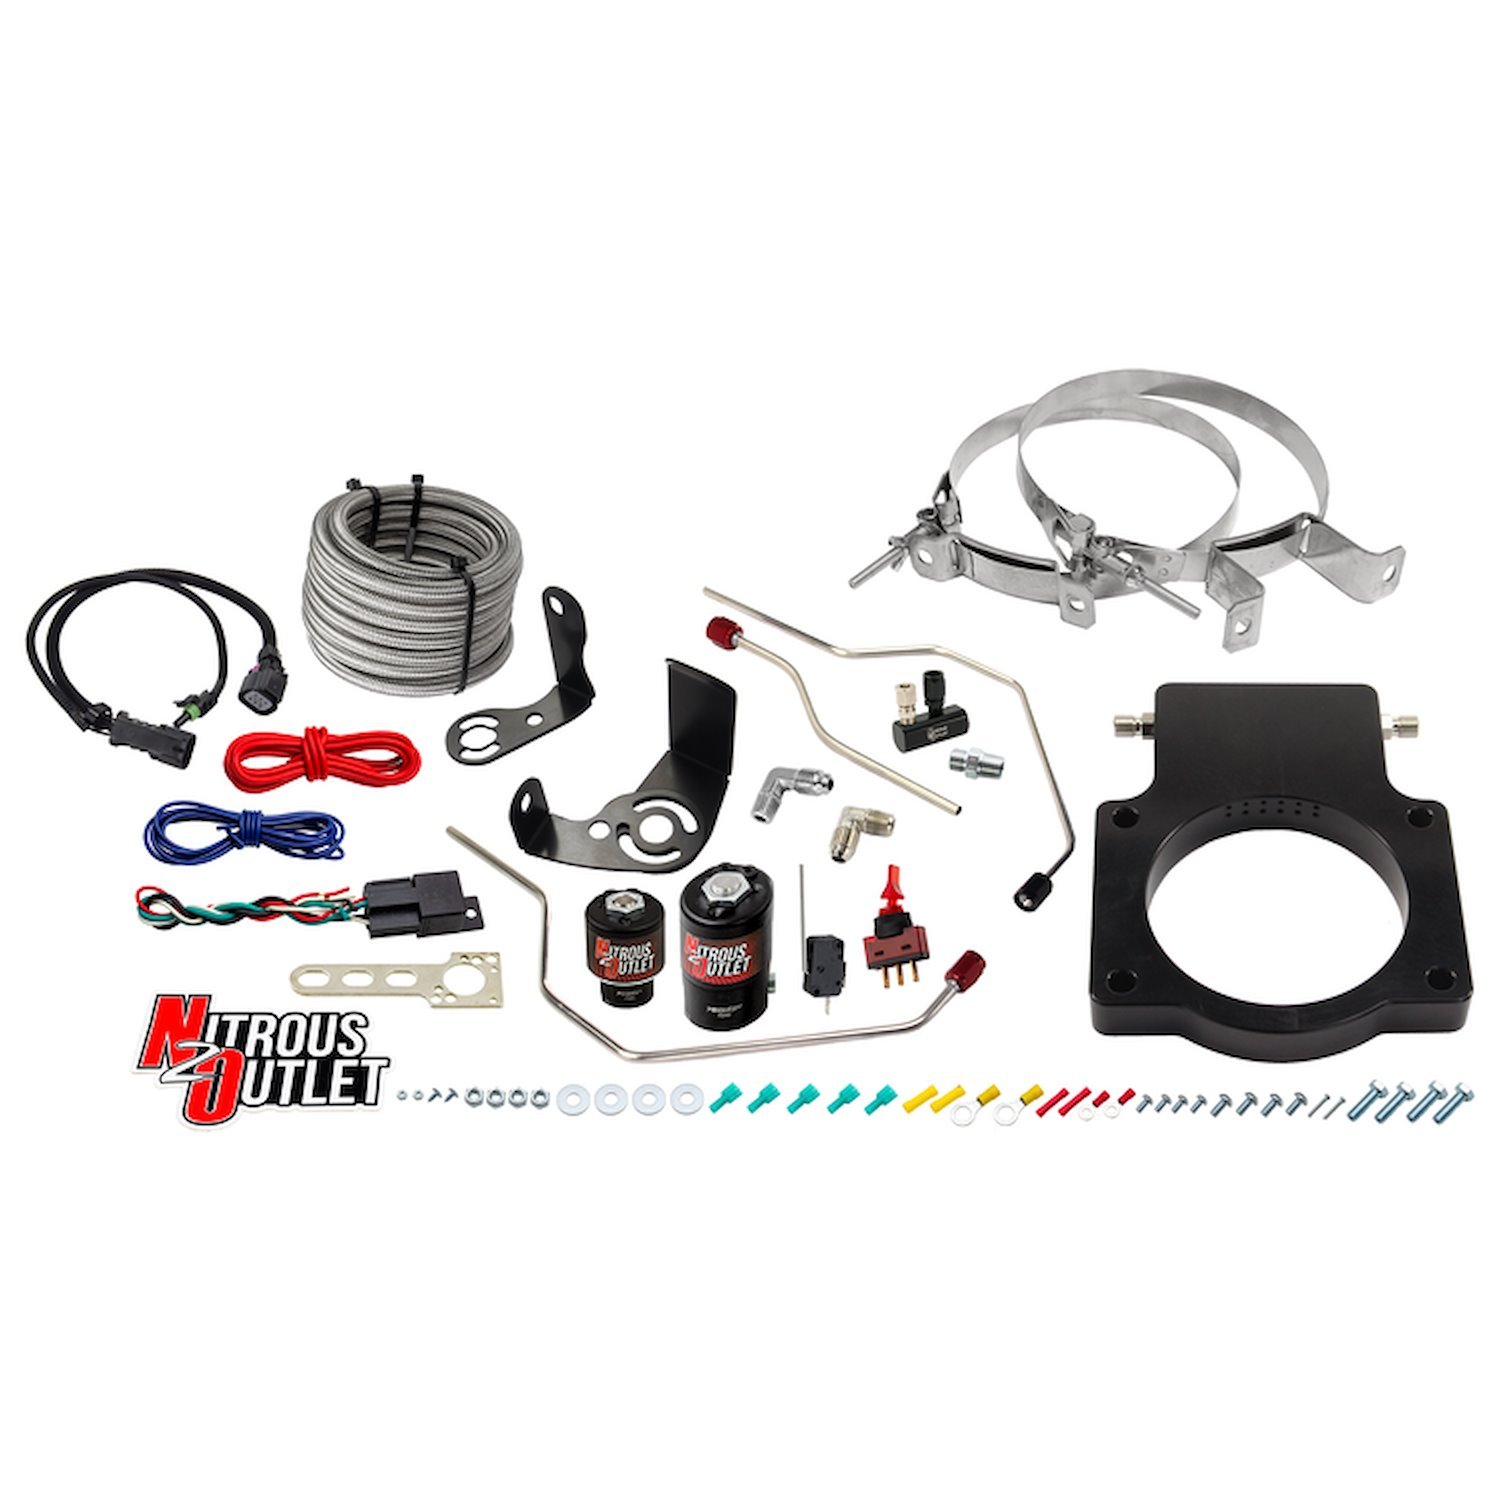 00-10119-90-00 Hard-Line Plate System, GM 90 mm 2010-2015 Camaro, Gas/E85, 5-55psi, 50-200HP, No Bottle